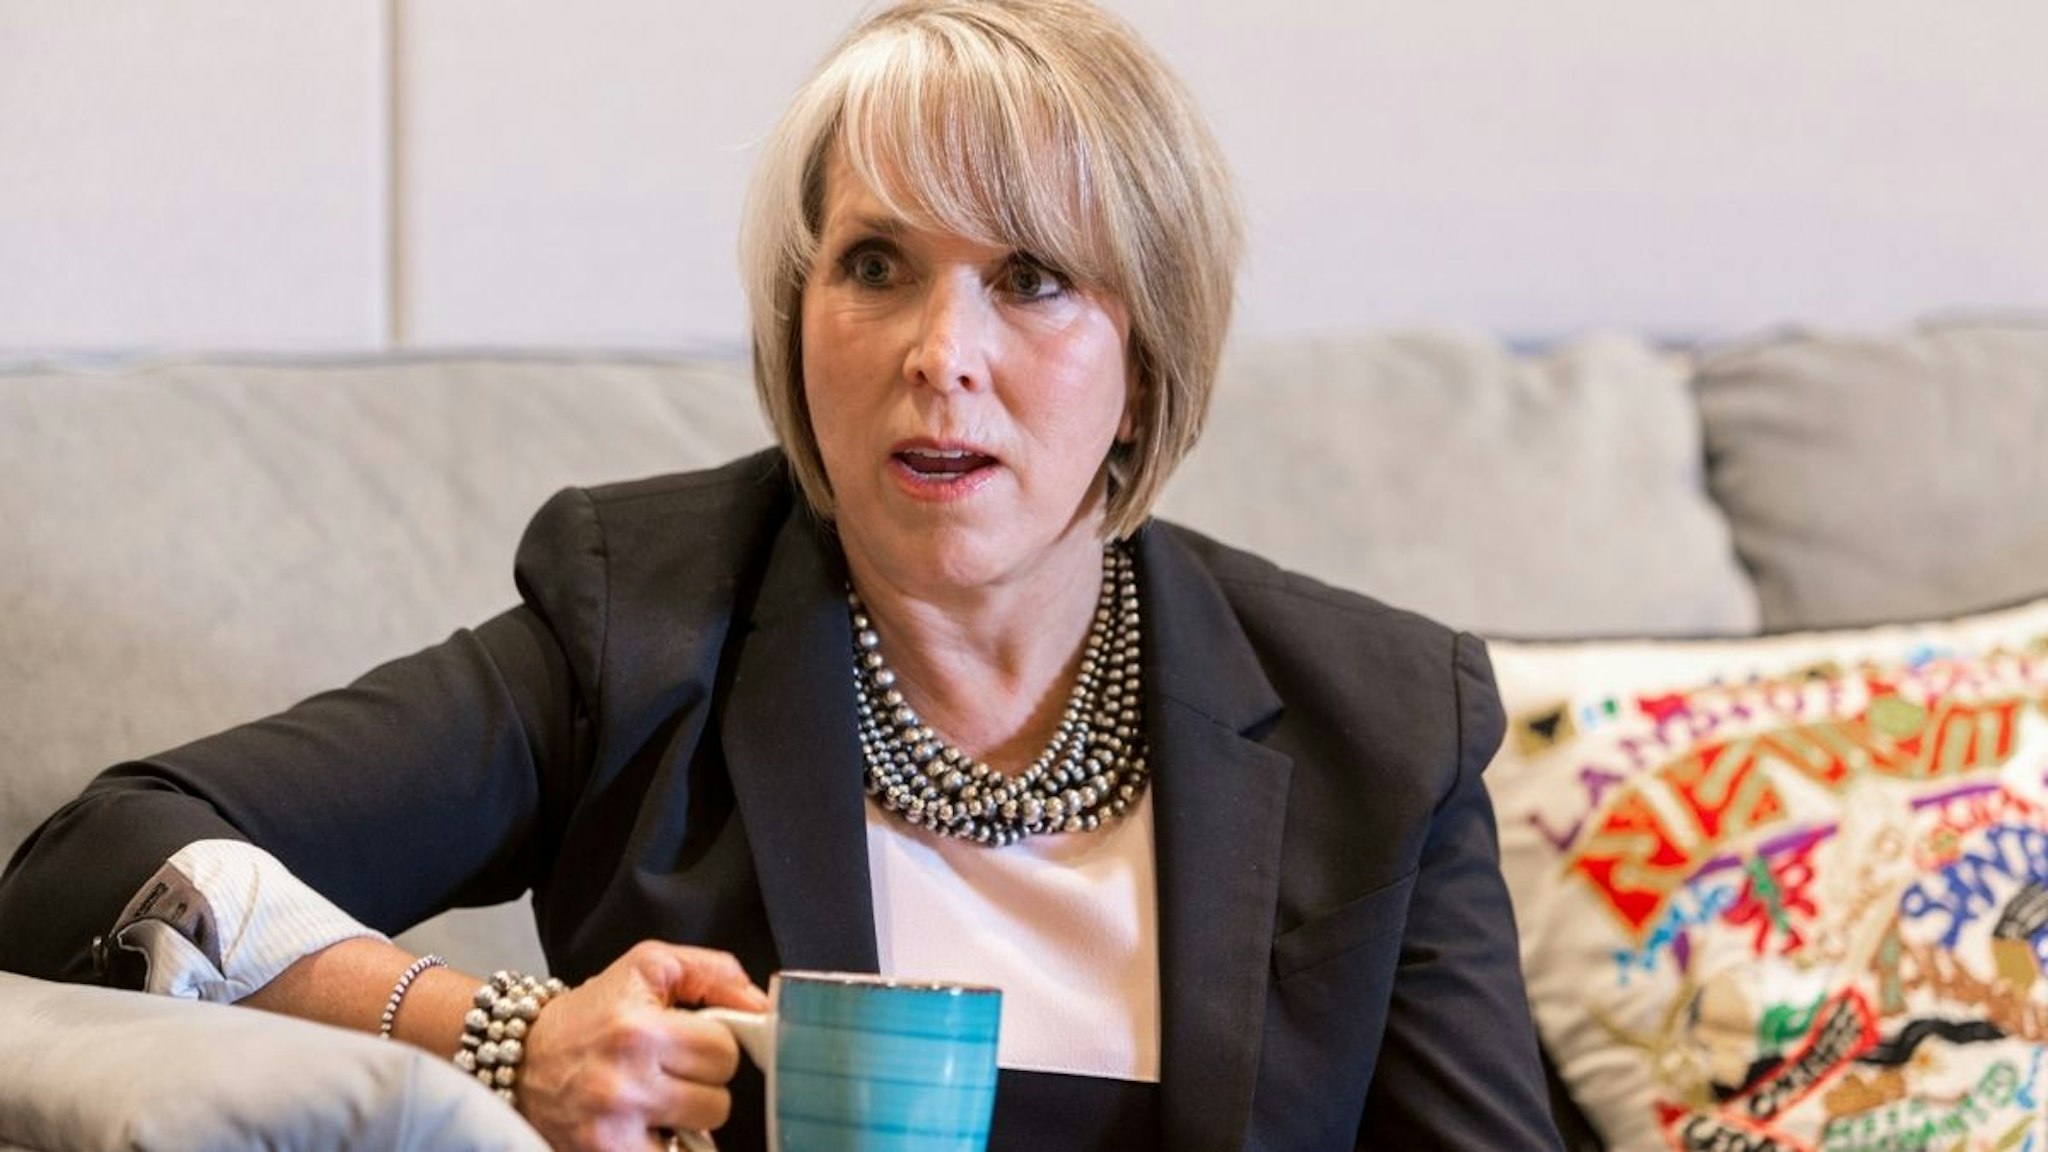 Michelle Lujan Grisham, governor of New Mexico, speaks during an interview at her office in Santa Fe, New Mexico, U.S., on Thursday, Aug. 8, 2019.